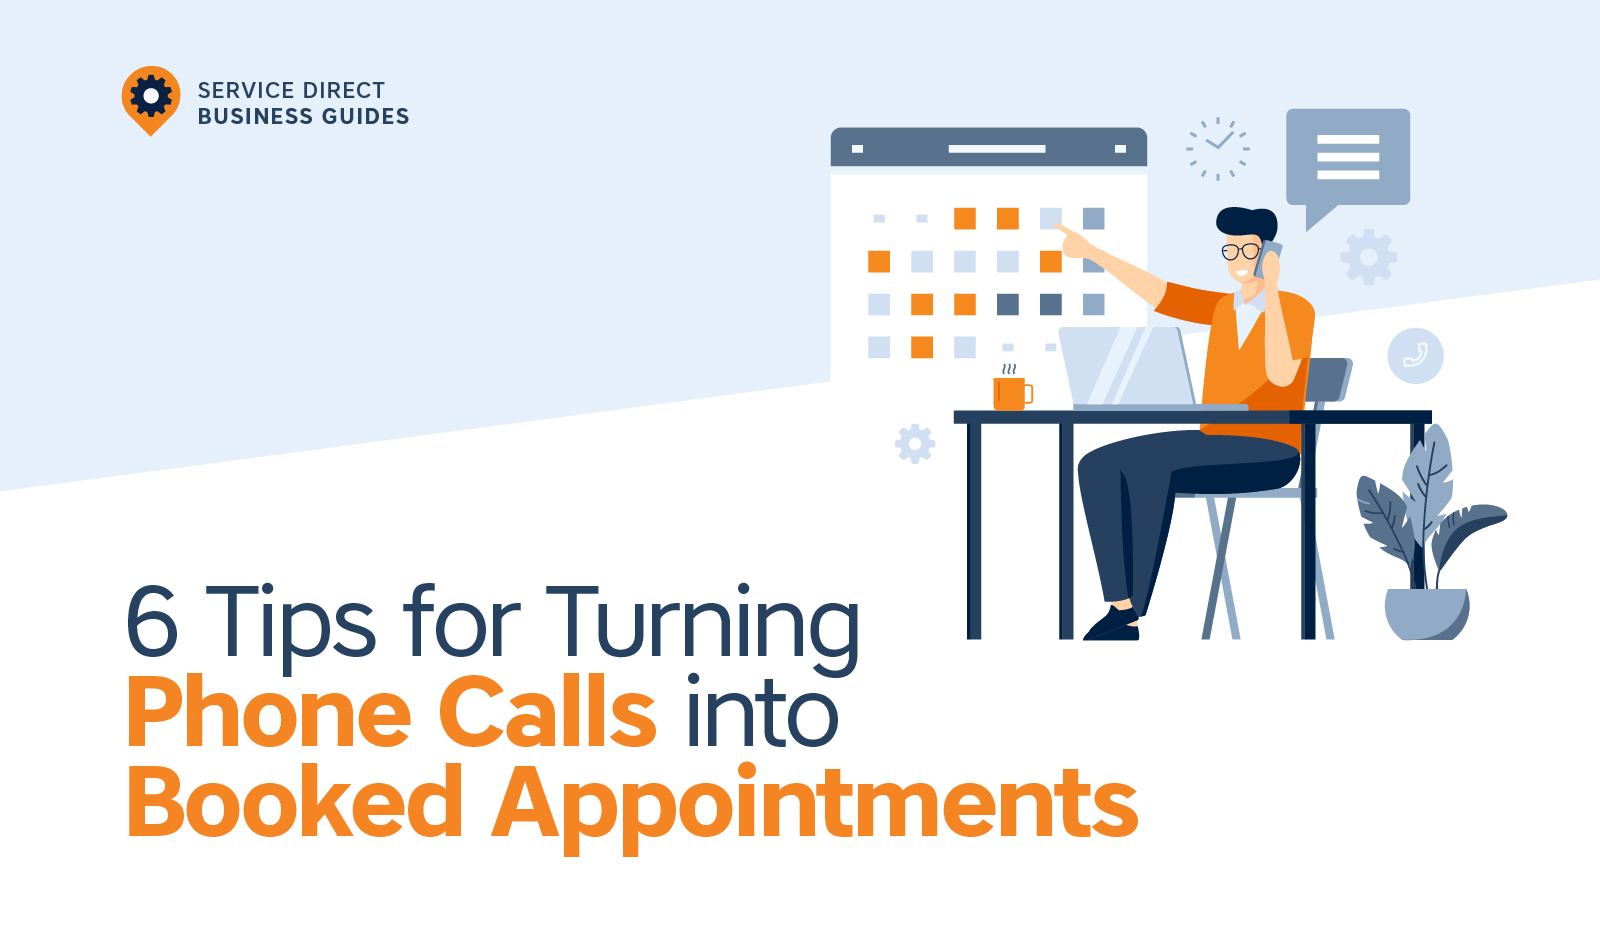 6 Tips for Turning Phone Calls into Booked Appointments